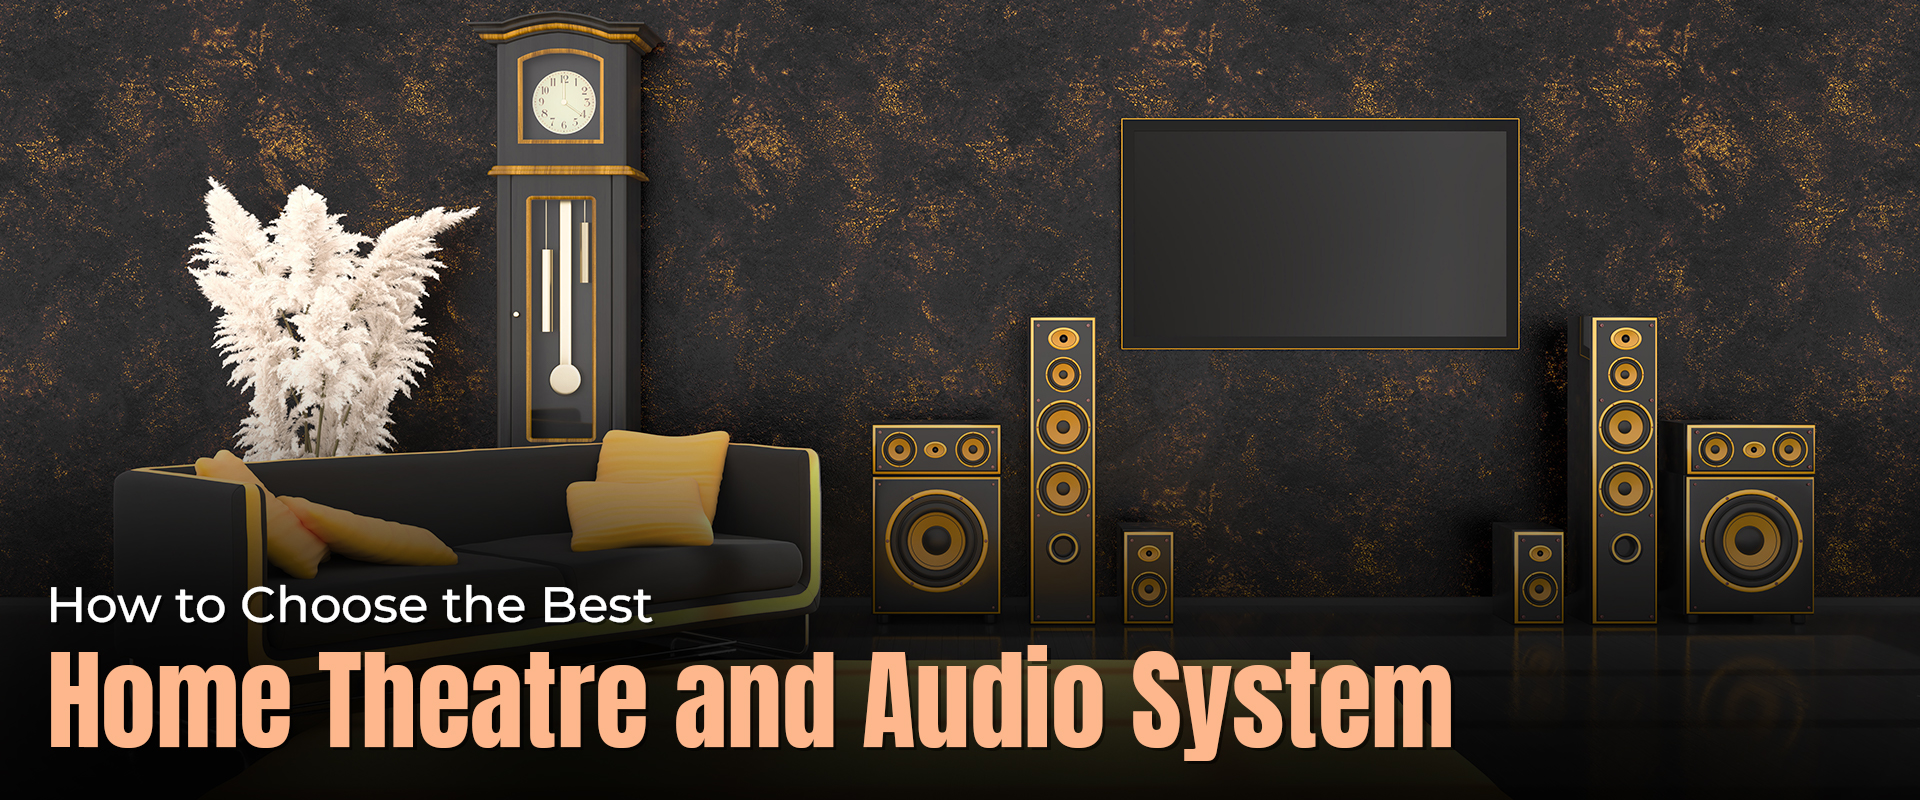 How to Choose the Best Home Theatre and Audio System